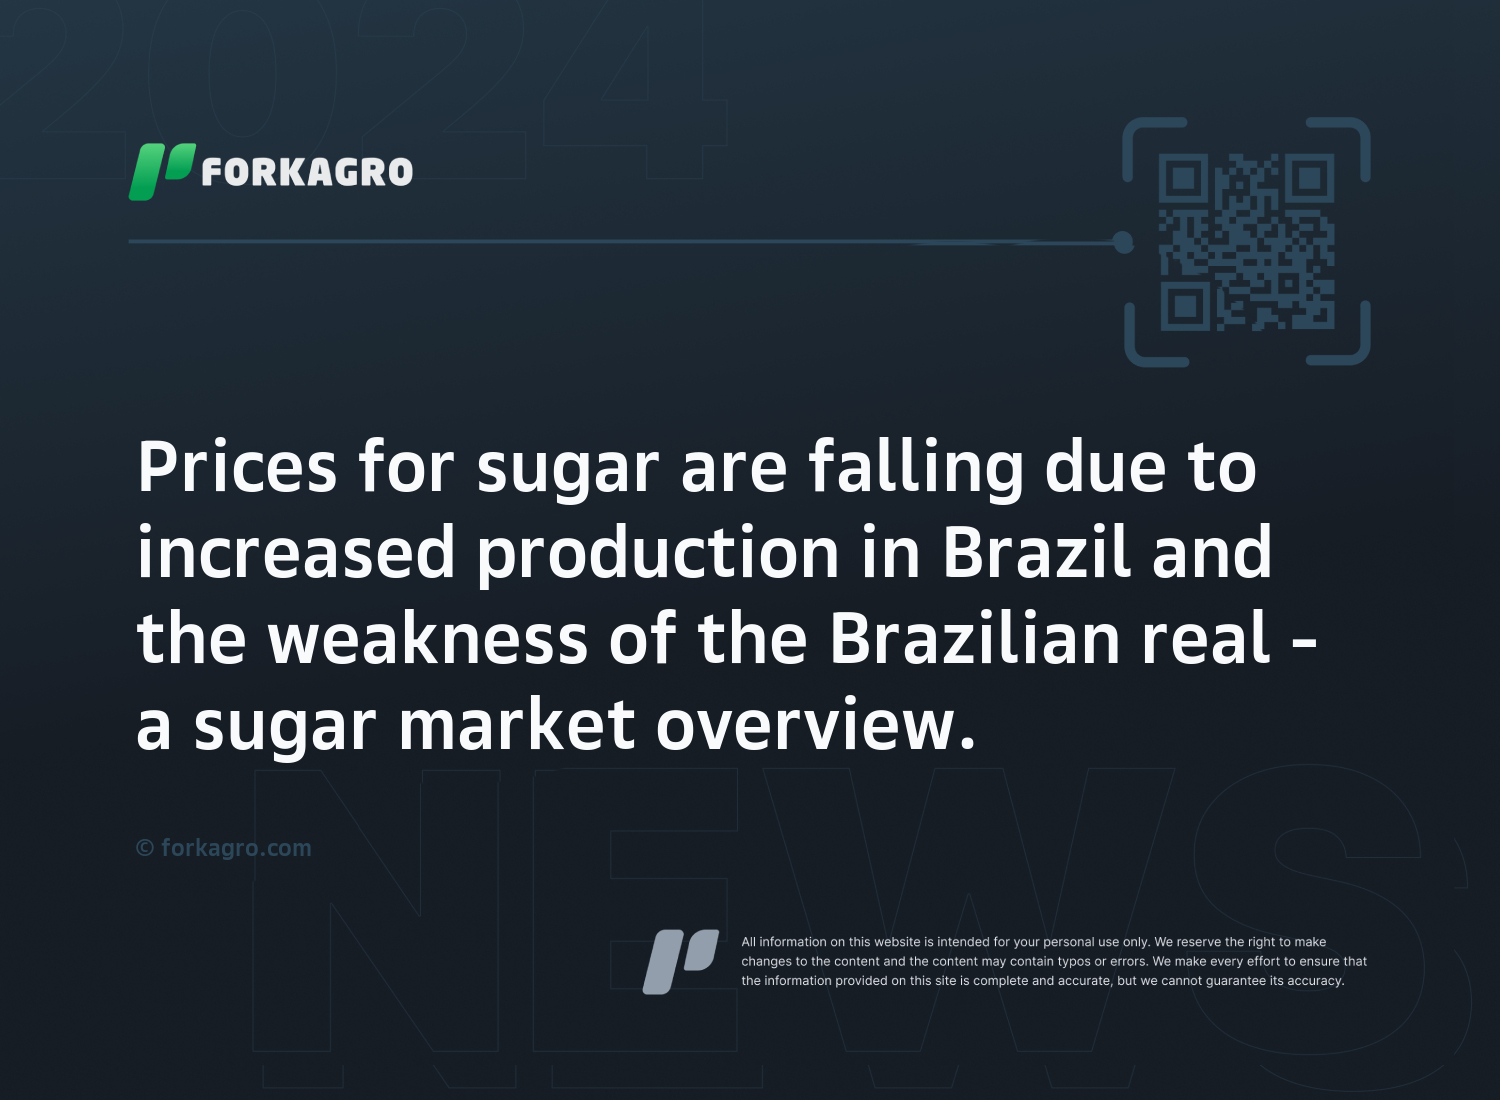 Prices for sugar are falling due to increased production in Brazil and the weakness of the Brazilian real - a sugar market overview.